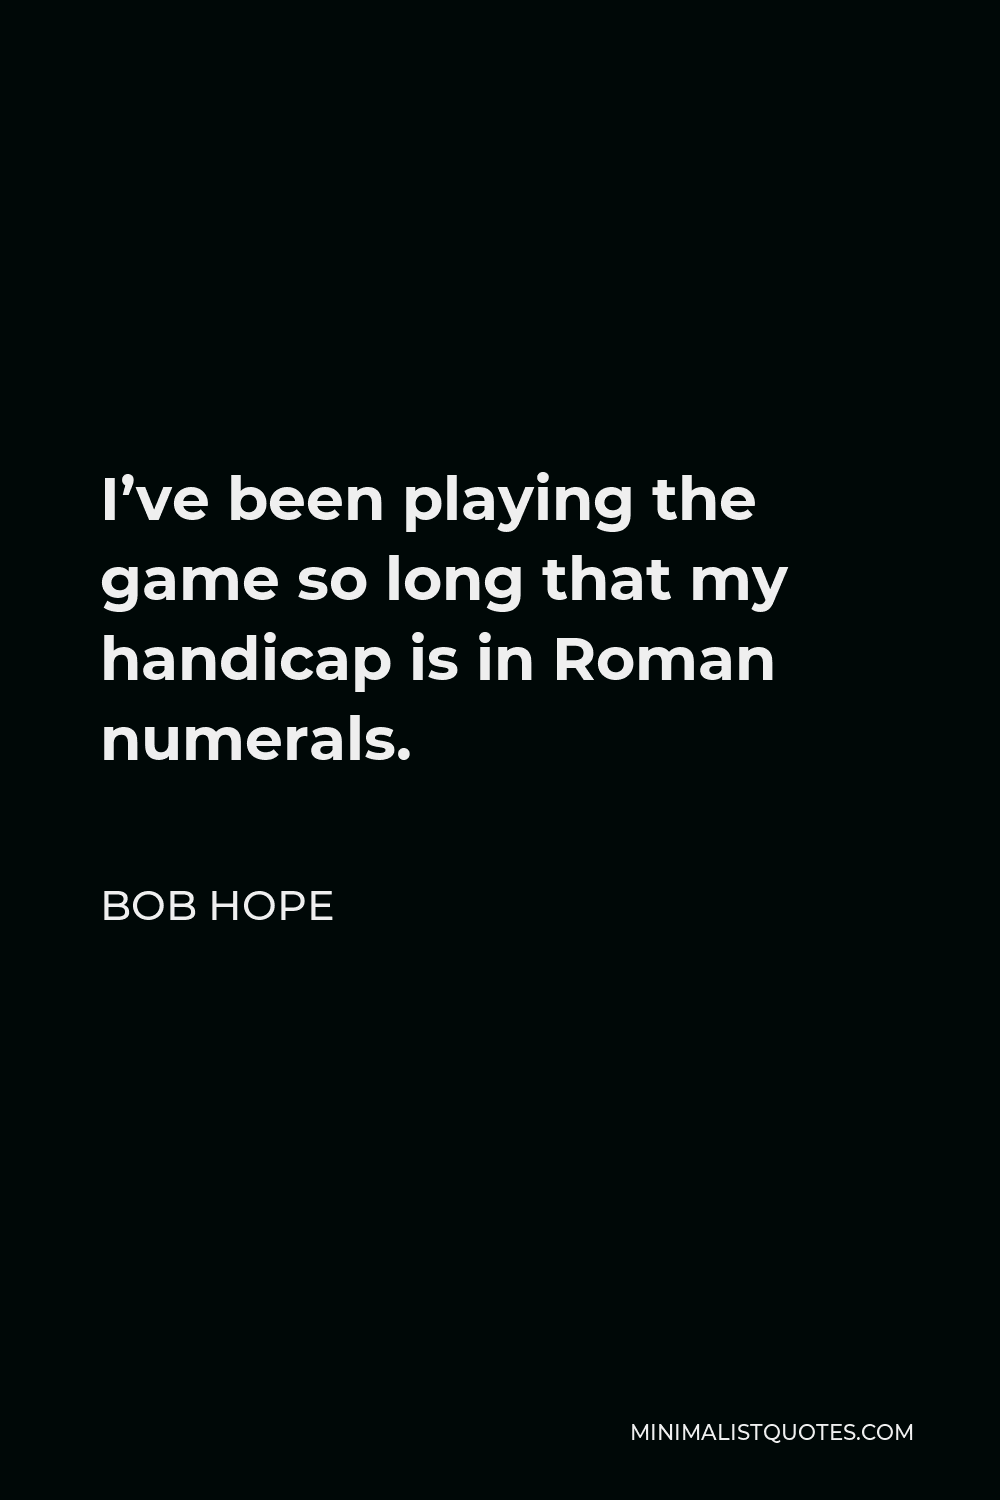 Bob Hope Quote - I’ve been playing the game so long that my handicap is in Roman numerals.